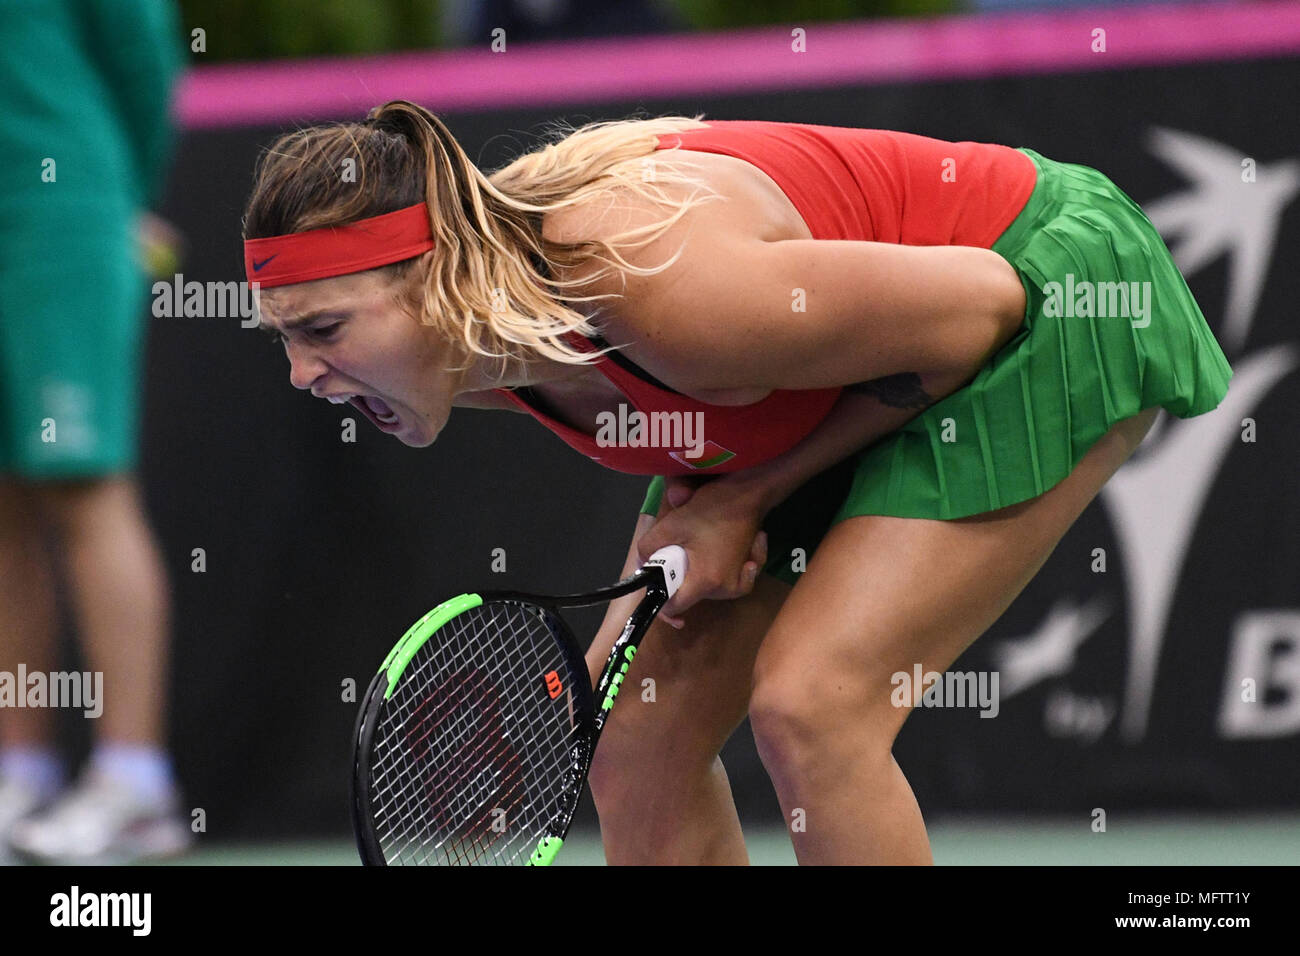 Minsk, Belarus. 21st April, 2018. Aryna Sabalenka (BLR) disappointed in a FedCup match against Vikoria Kuzmova being played at Chizhovka Arena in Minsk, Belarus Stock Photo